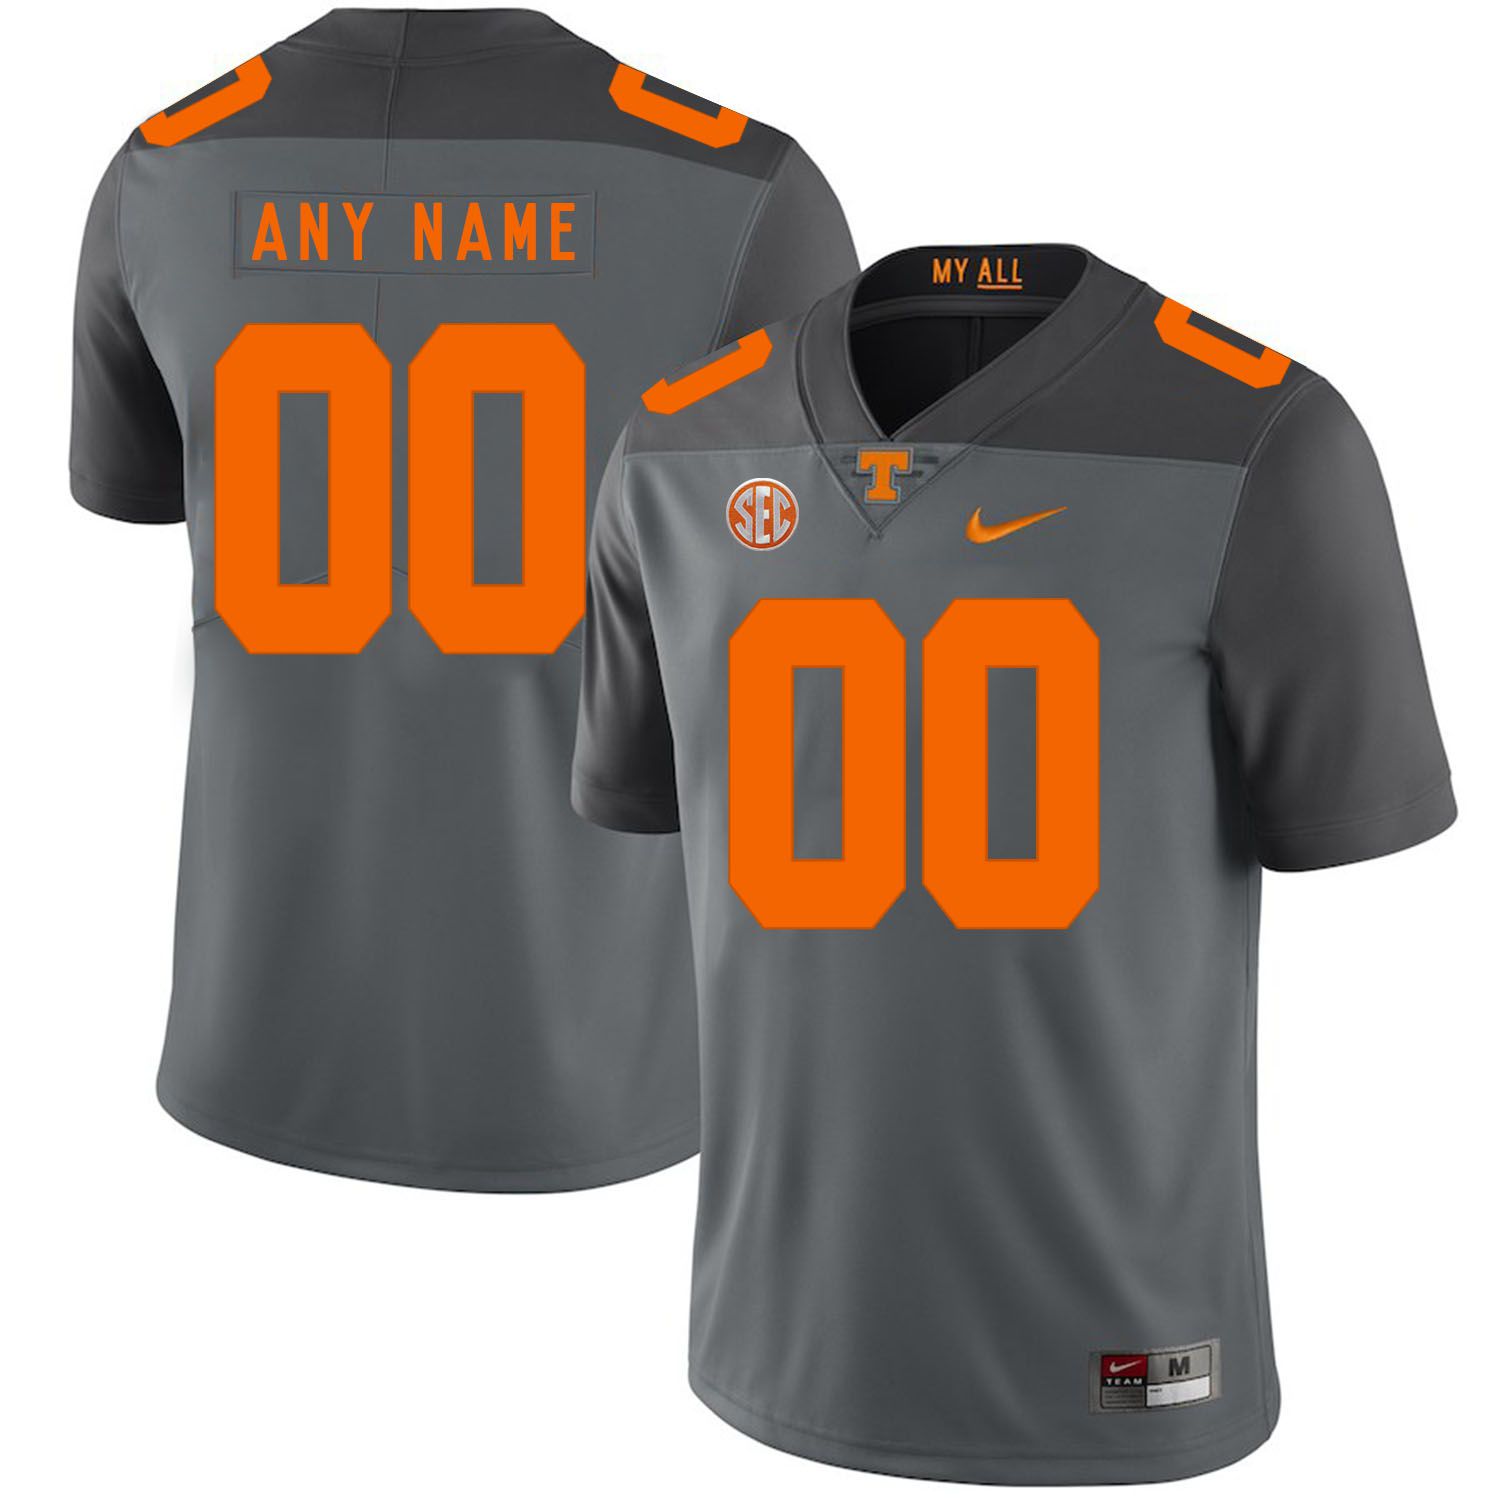 Men Tennessee Volunteers 00 Any name Grey Customized NCAA Jerseys